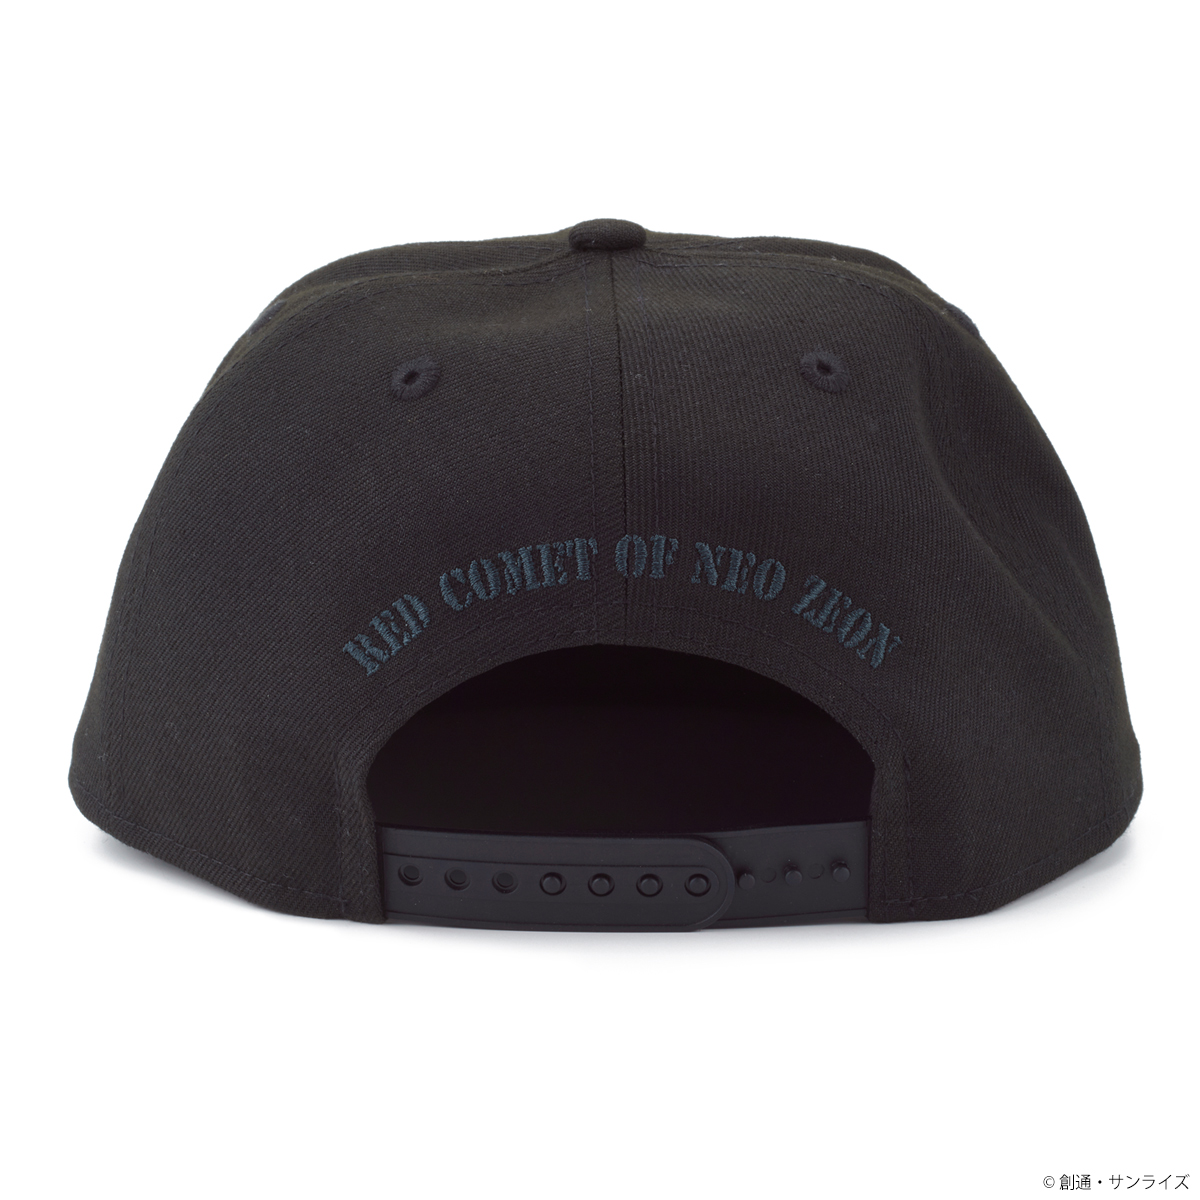 STRICT-G New Era "Mobile Suit Gundam: Char of Strike Back" 9FIFTY Cap NEO ZEON